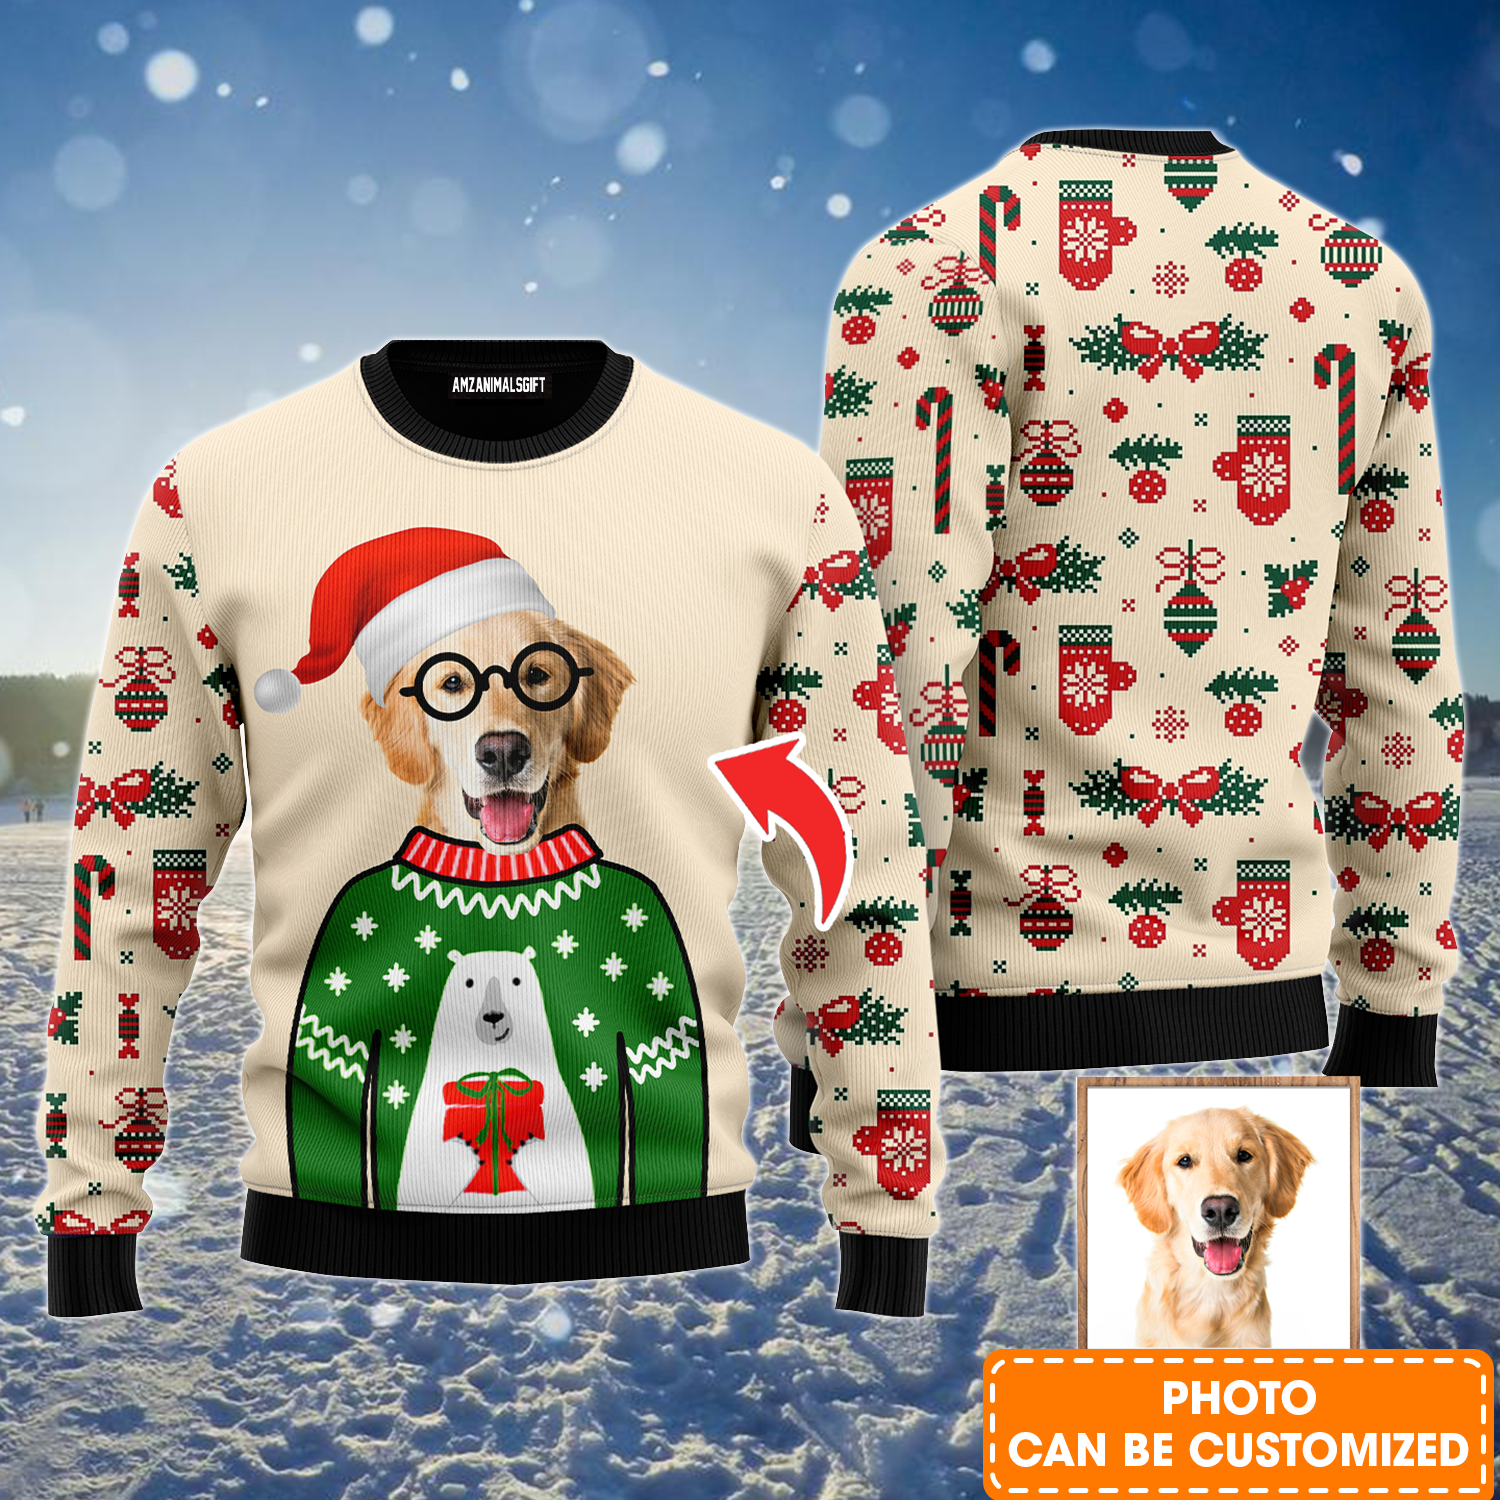 Personalized Photo Ugly Sweater, Custom Funny Your Photo Christmas Ugly Sweater For Men & Women, Perfect Gift For Christmas, Friends, Family